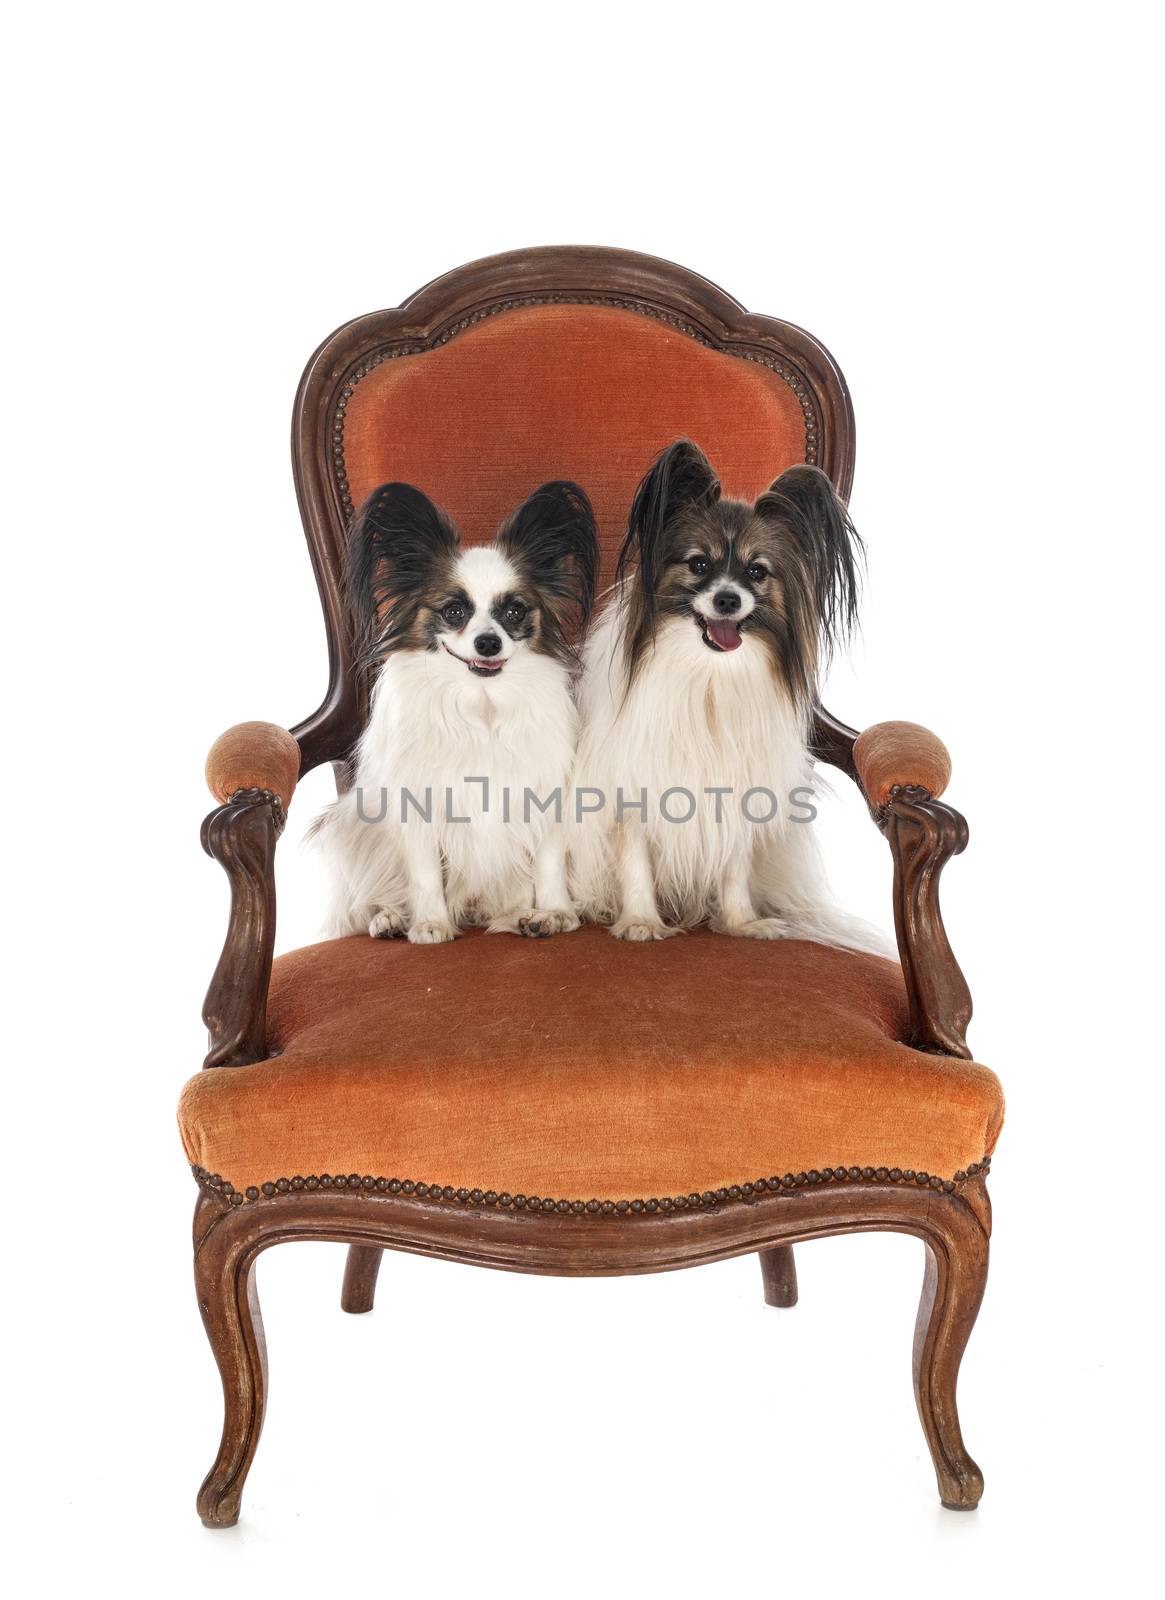 little dogs on chair by cynoclub